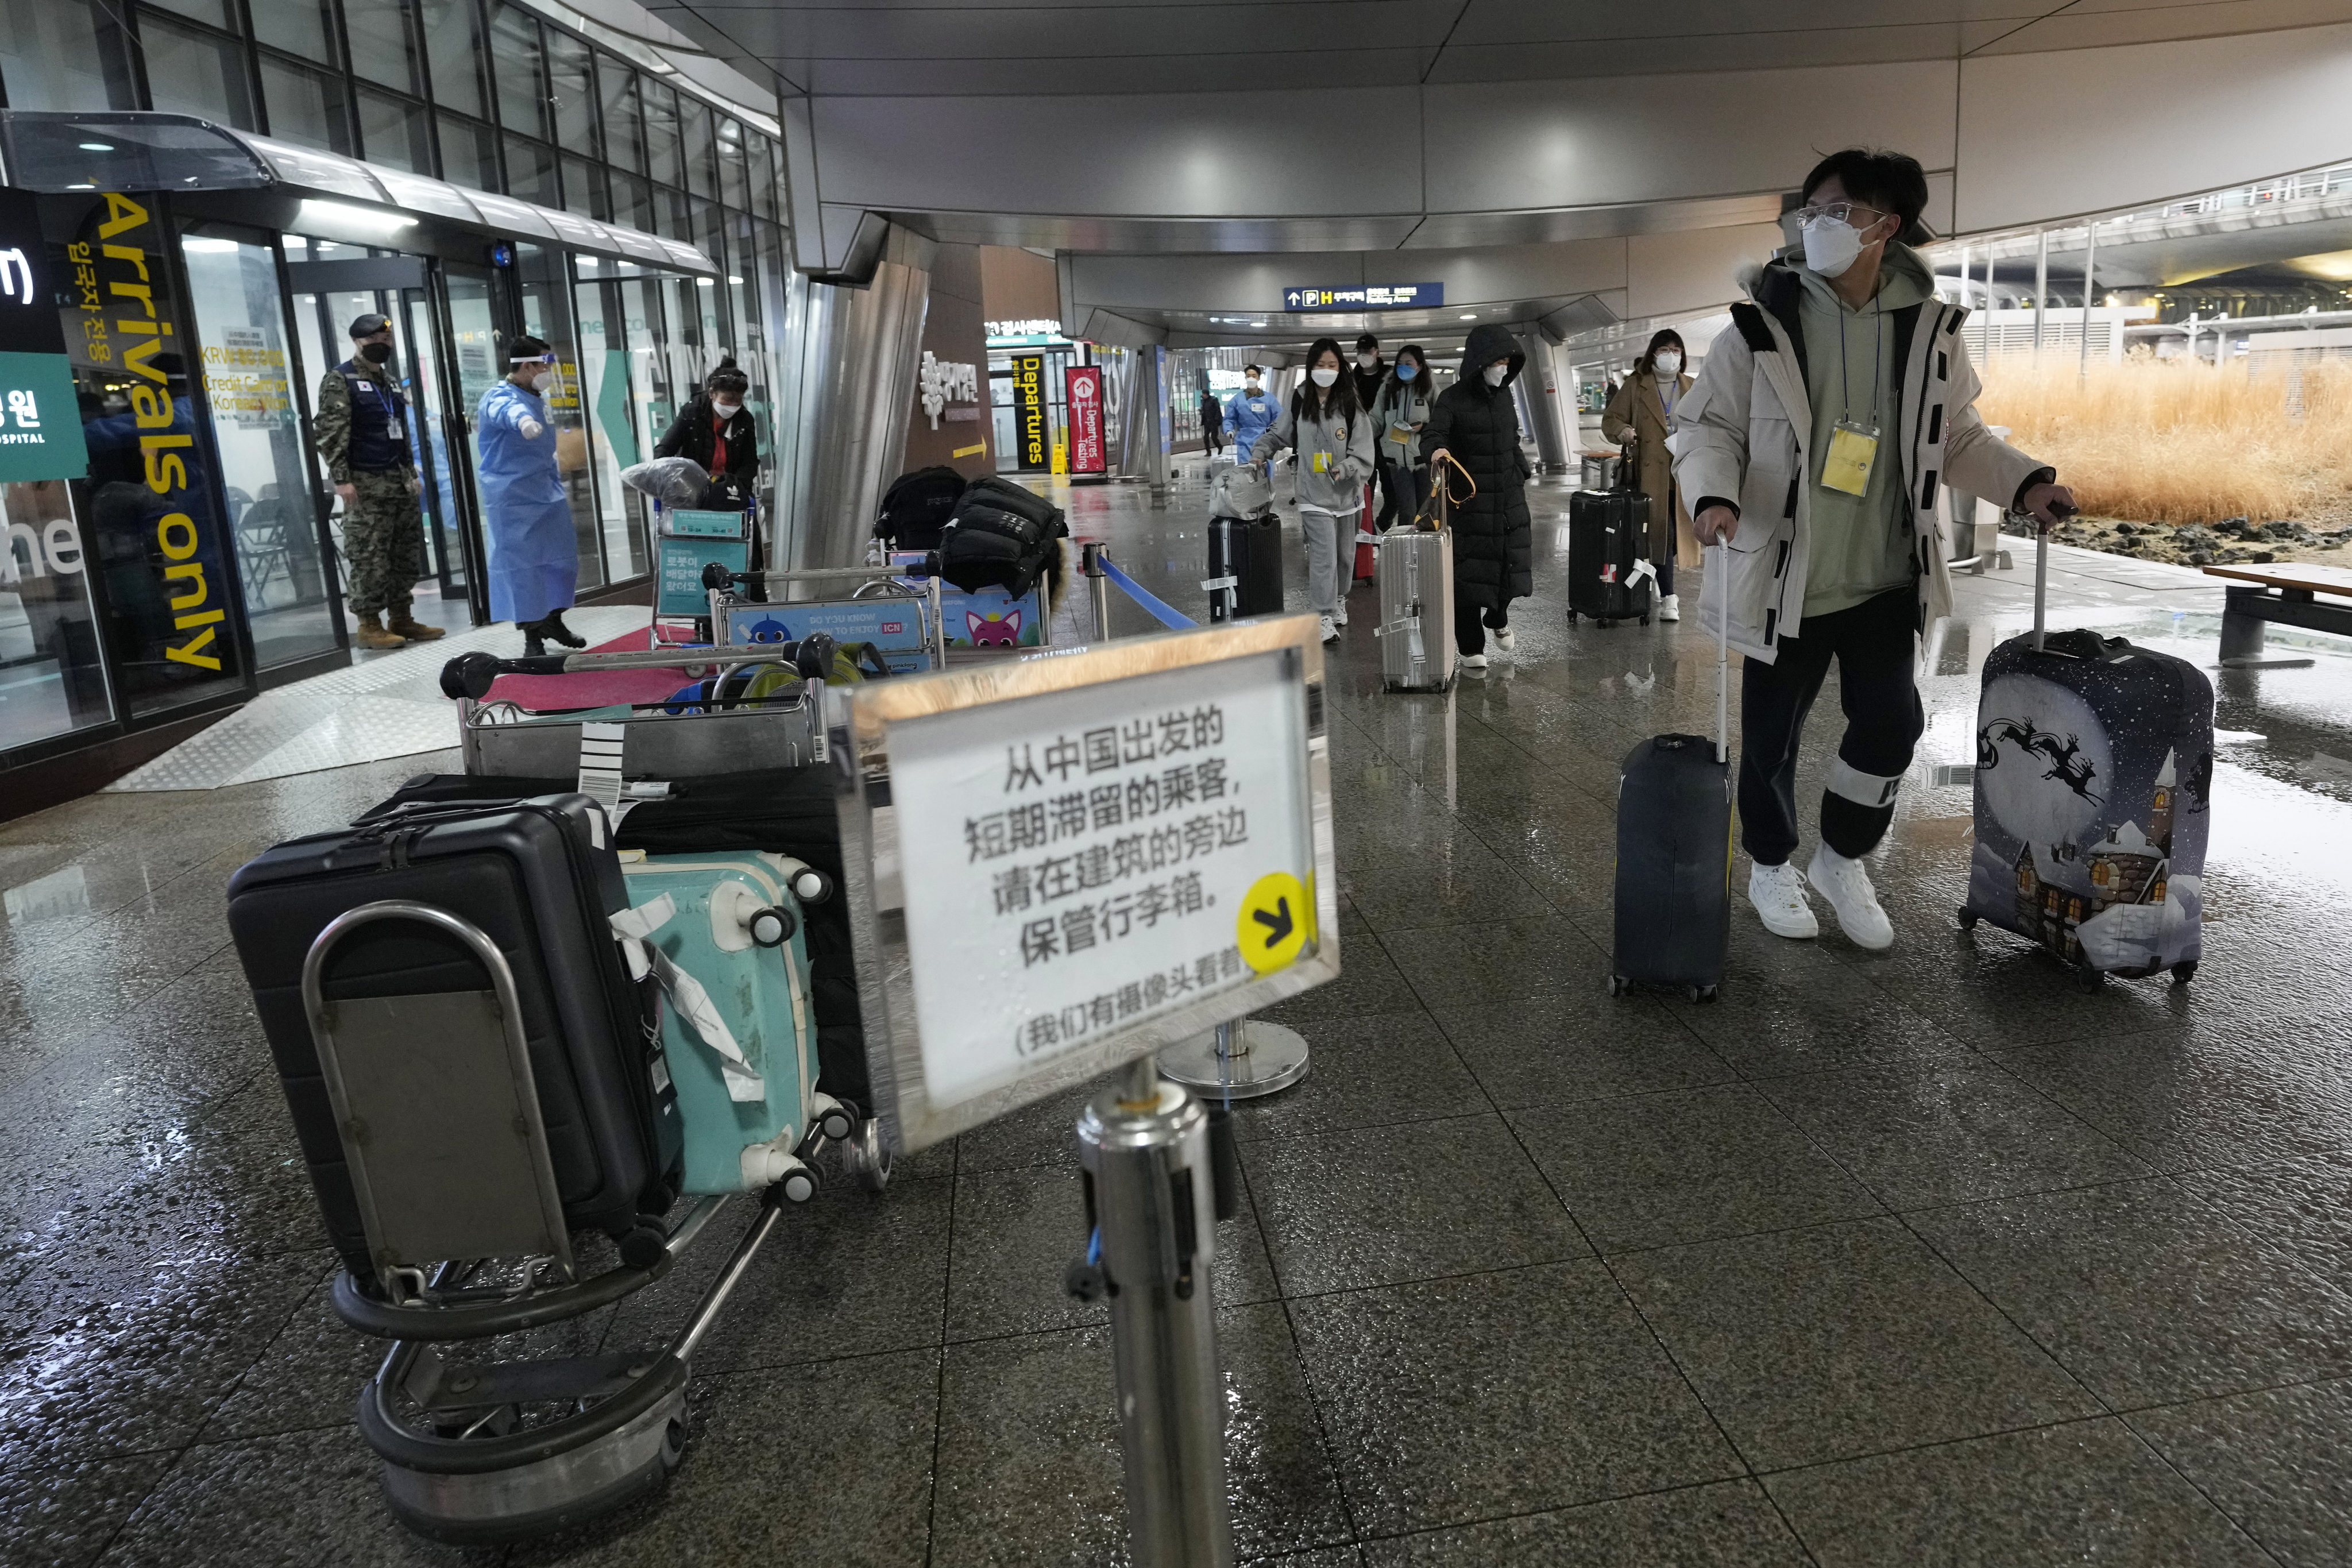 China will start issuing visas to South Korean visitors after Seoul dropped restrictions on Chinese arrivals. Photo: AP